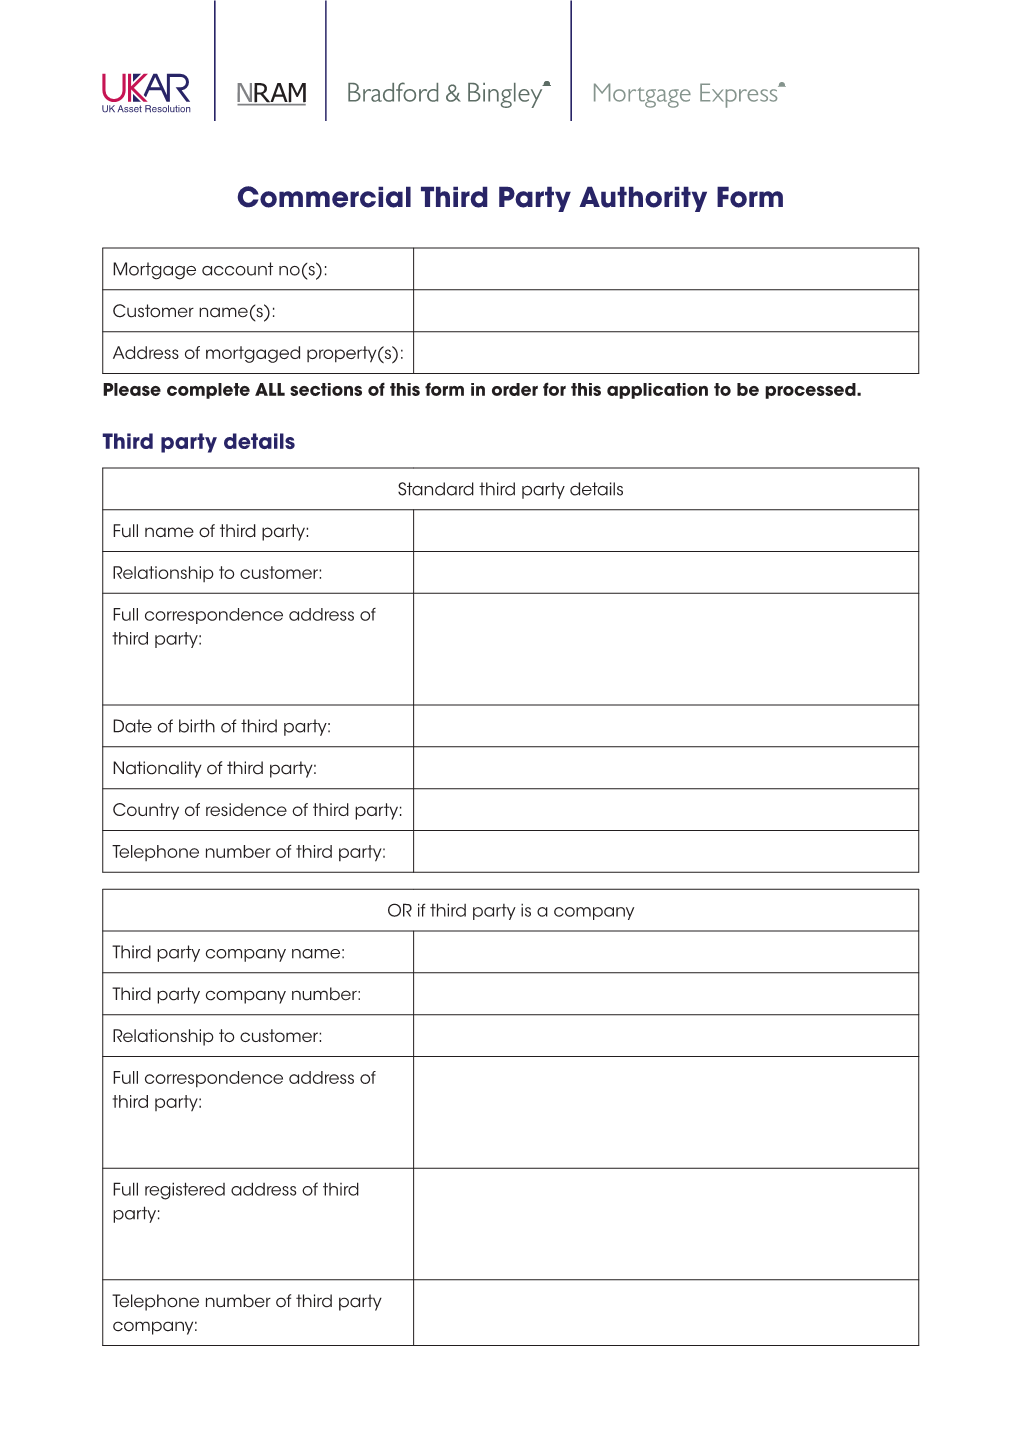 Commercial Third Party Authority Form